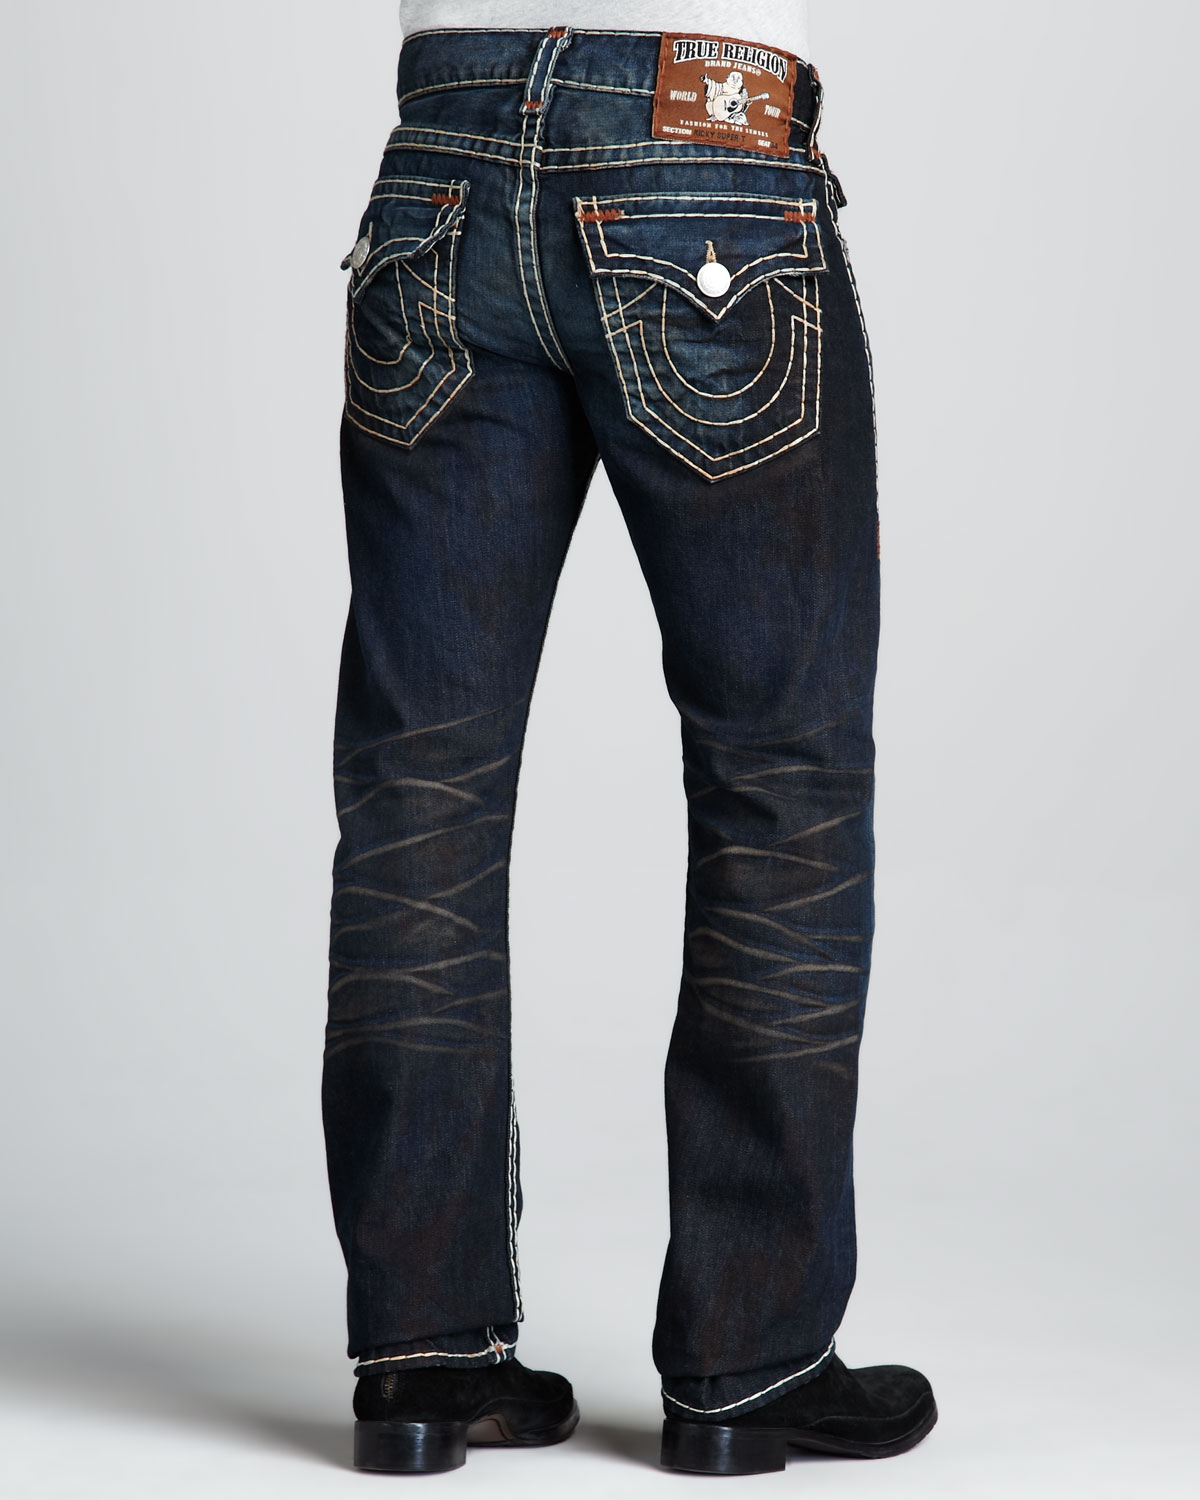 Lyst - True Religion Ricky Super T Collateral Jeans in Blue for Men